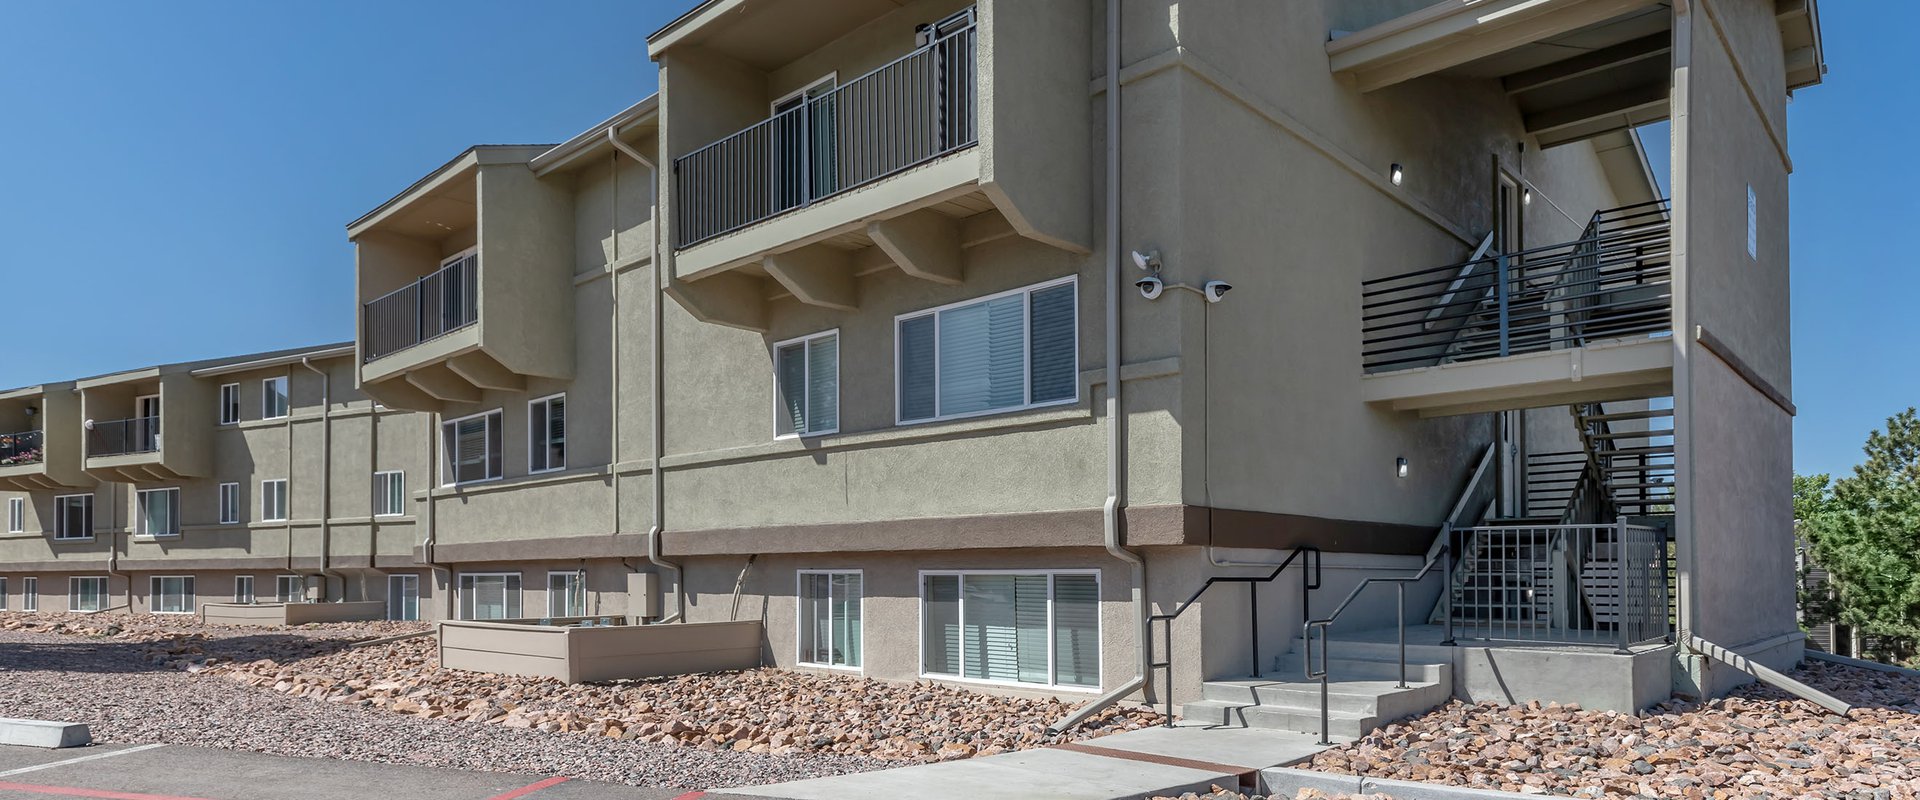 exterior view of apartment building at Stone Canyon in Colorado Springs